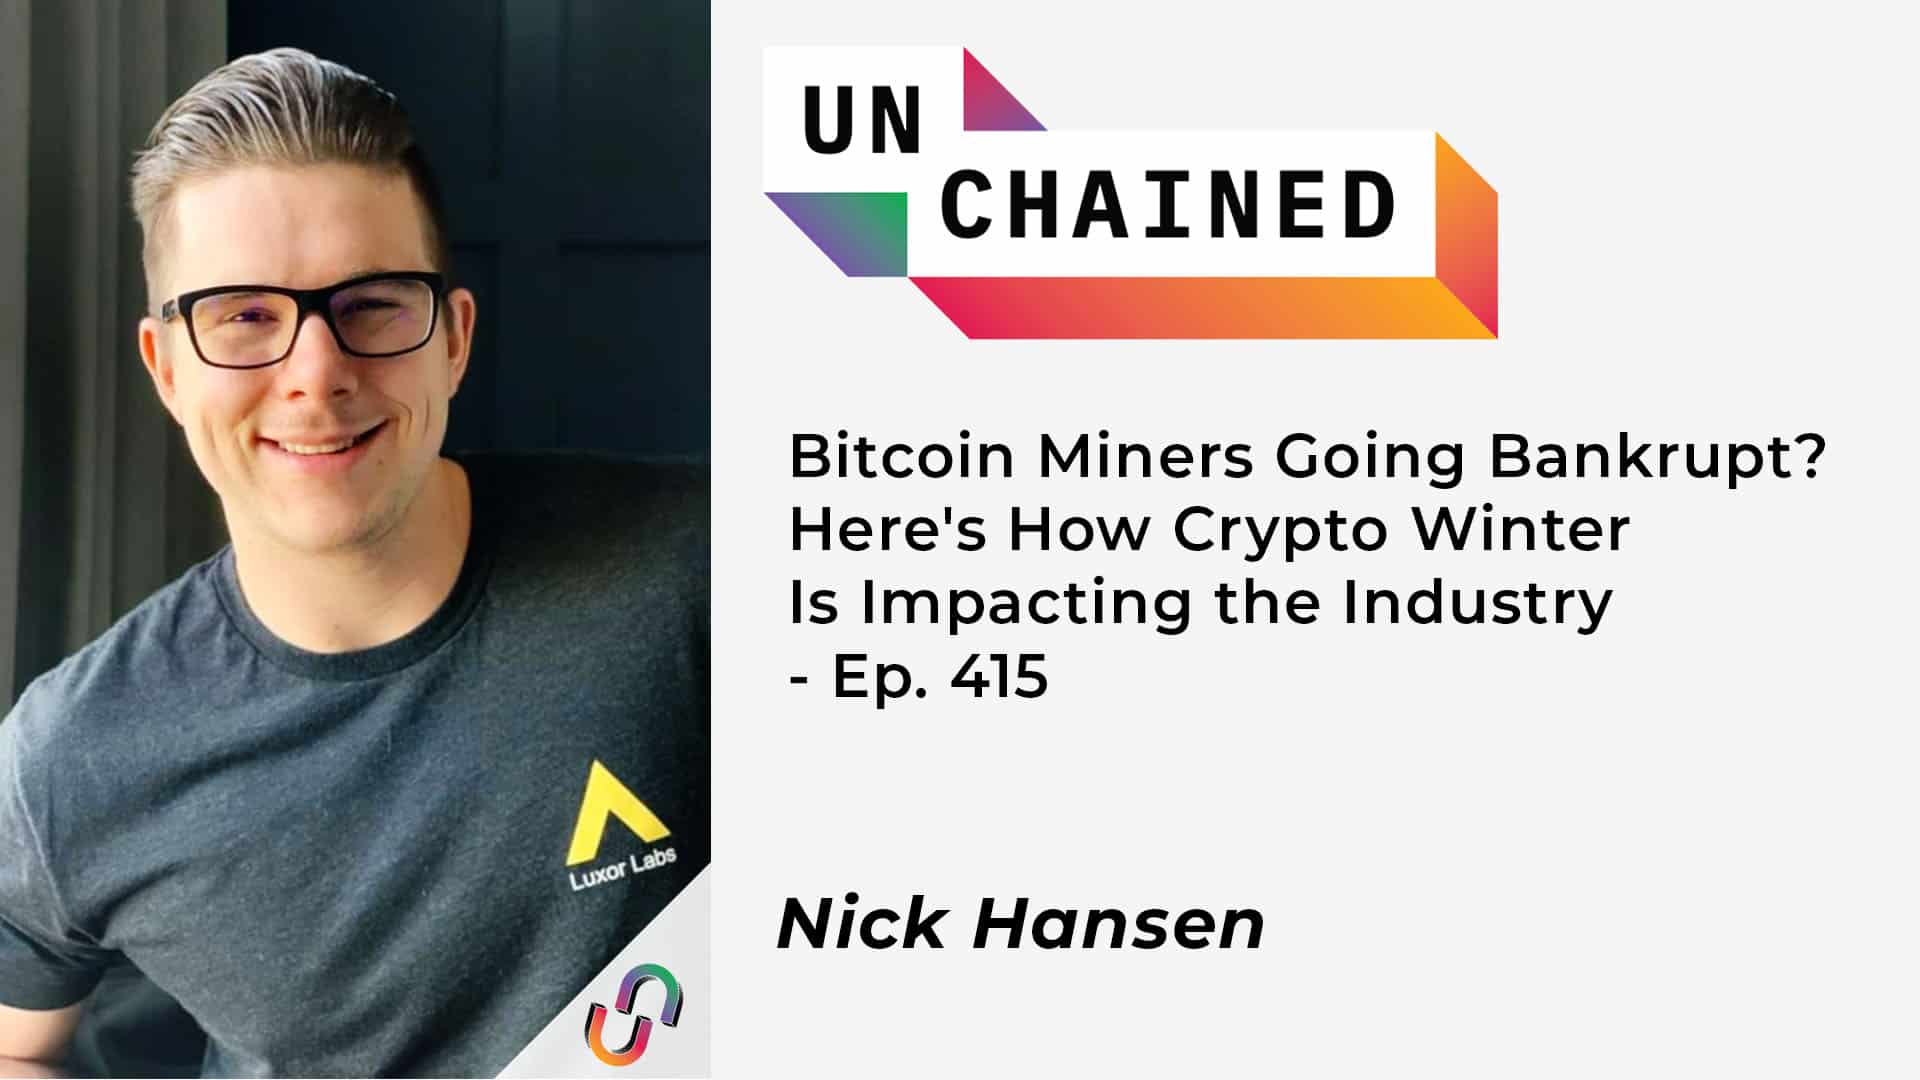 Bitcoin Miners Going Bankrupt? Here's How Crypto Winter Is Impacting the Industry - Ep. 415